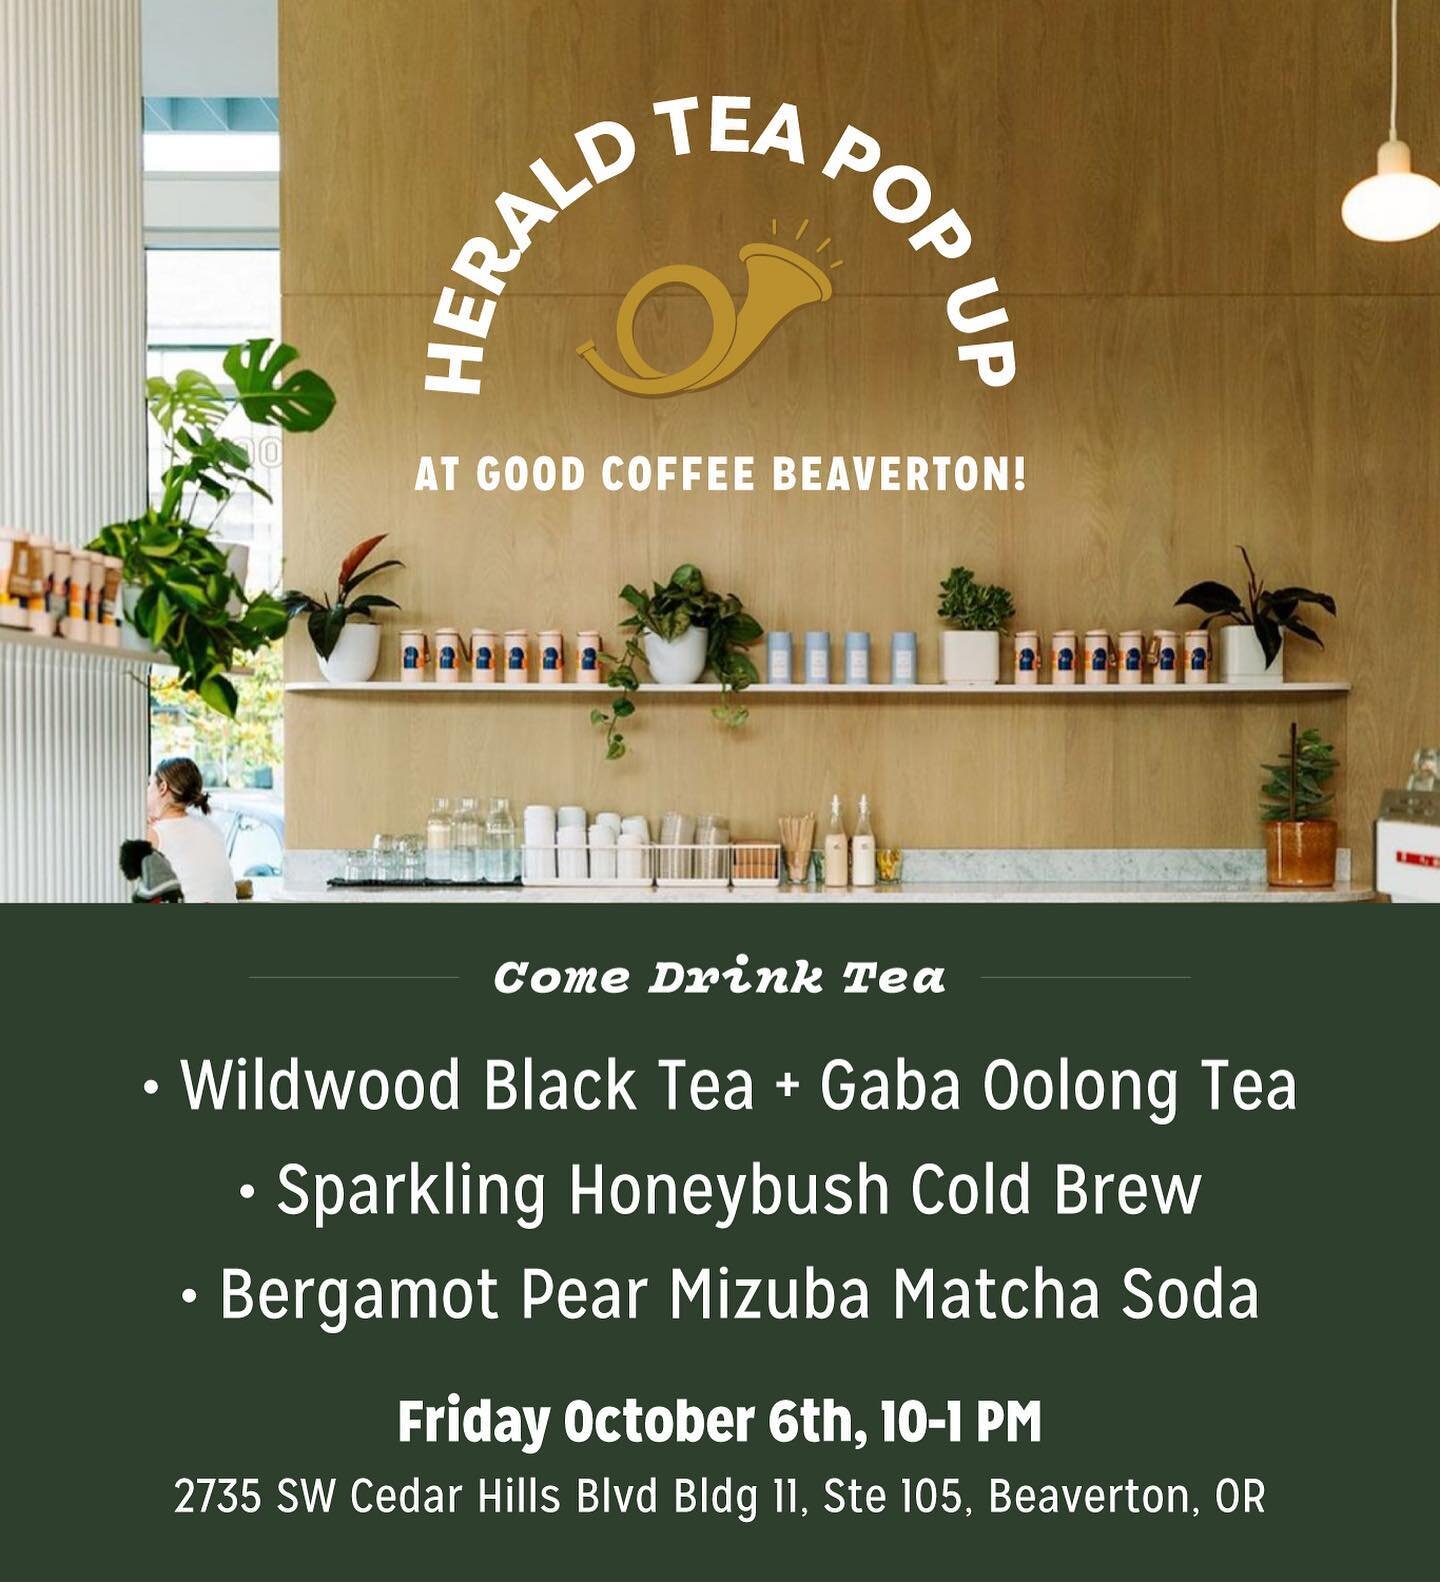 Herald Tea x Mizuba Tea Pop Up with our friends at Good Coffee at their gorgeous new cafe in Beaverton! Stop by if you can! So much #teaofcharacter to share!